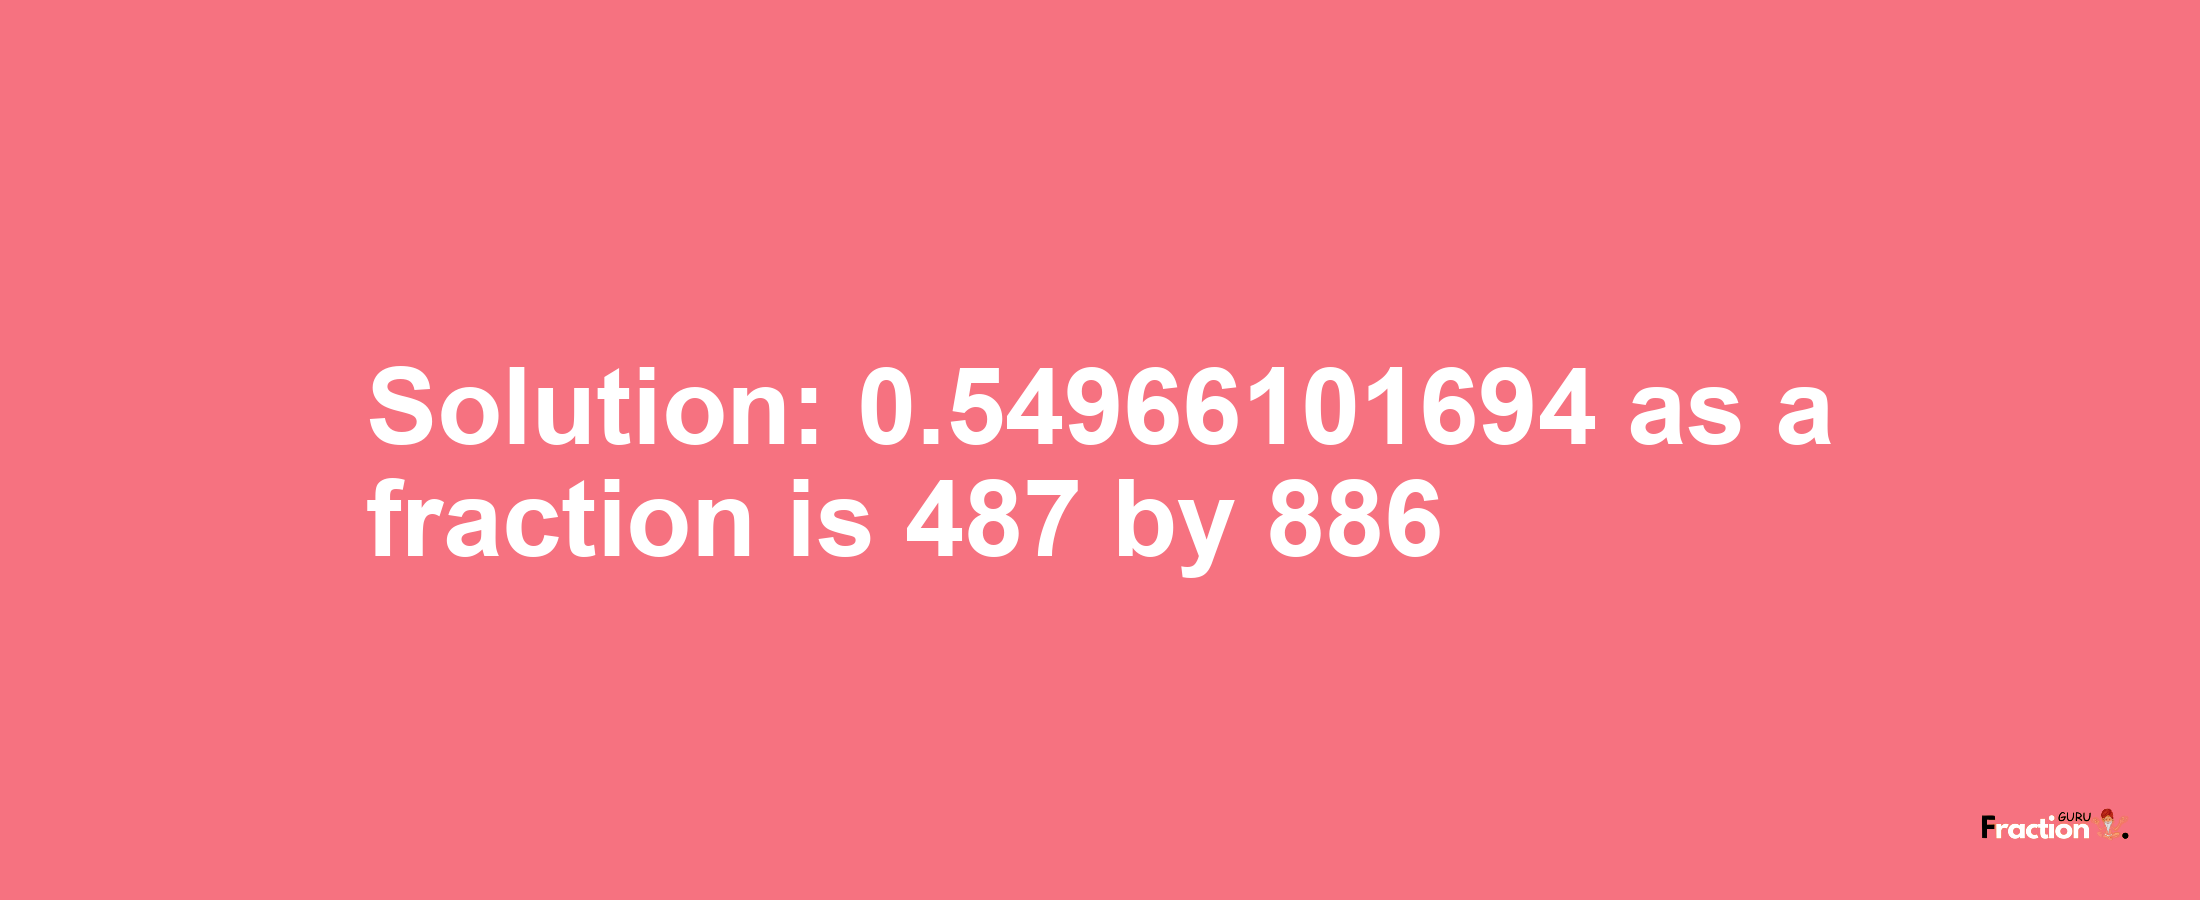 Solution:0.54966101694 as a fraction is 487/886